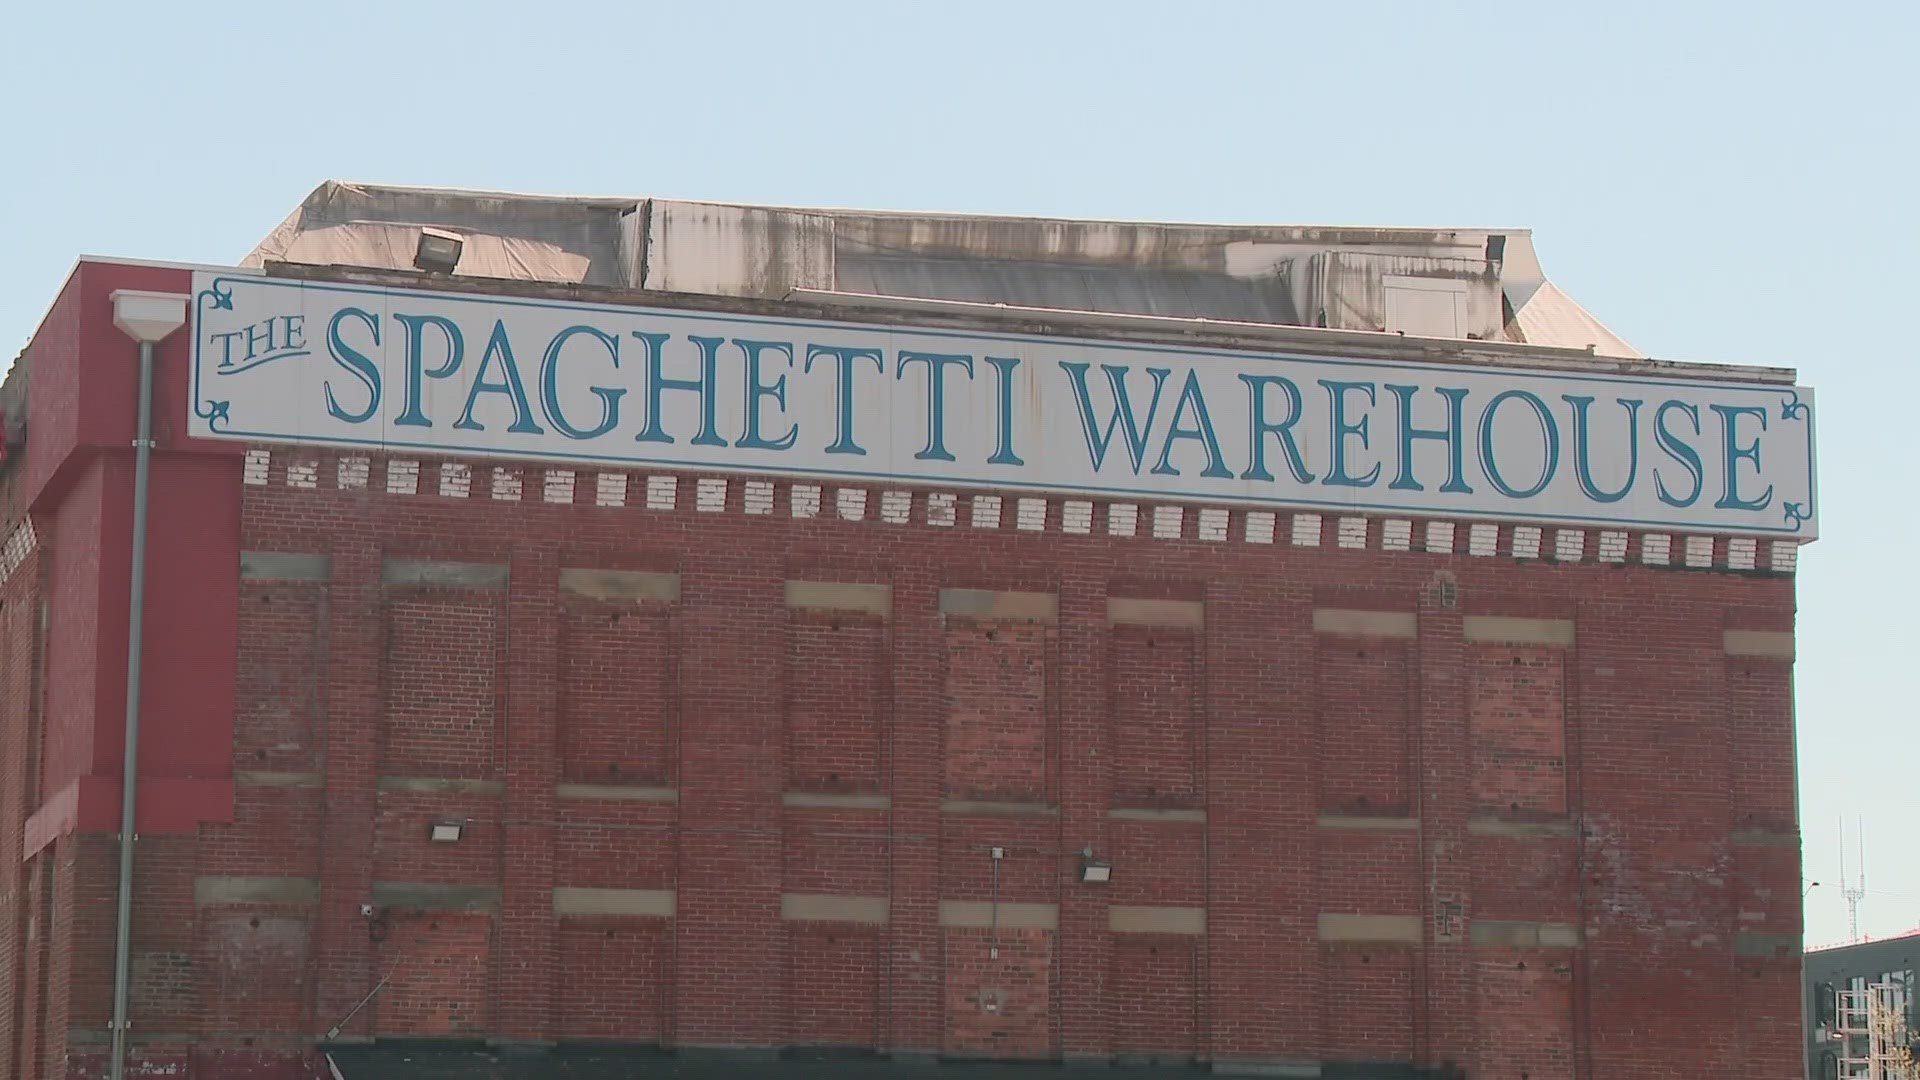 In March 2022, the Spaghetti Warehouse sustained damage to its roof at its former location on West Broad Street after a partial collapse during repair work.